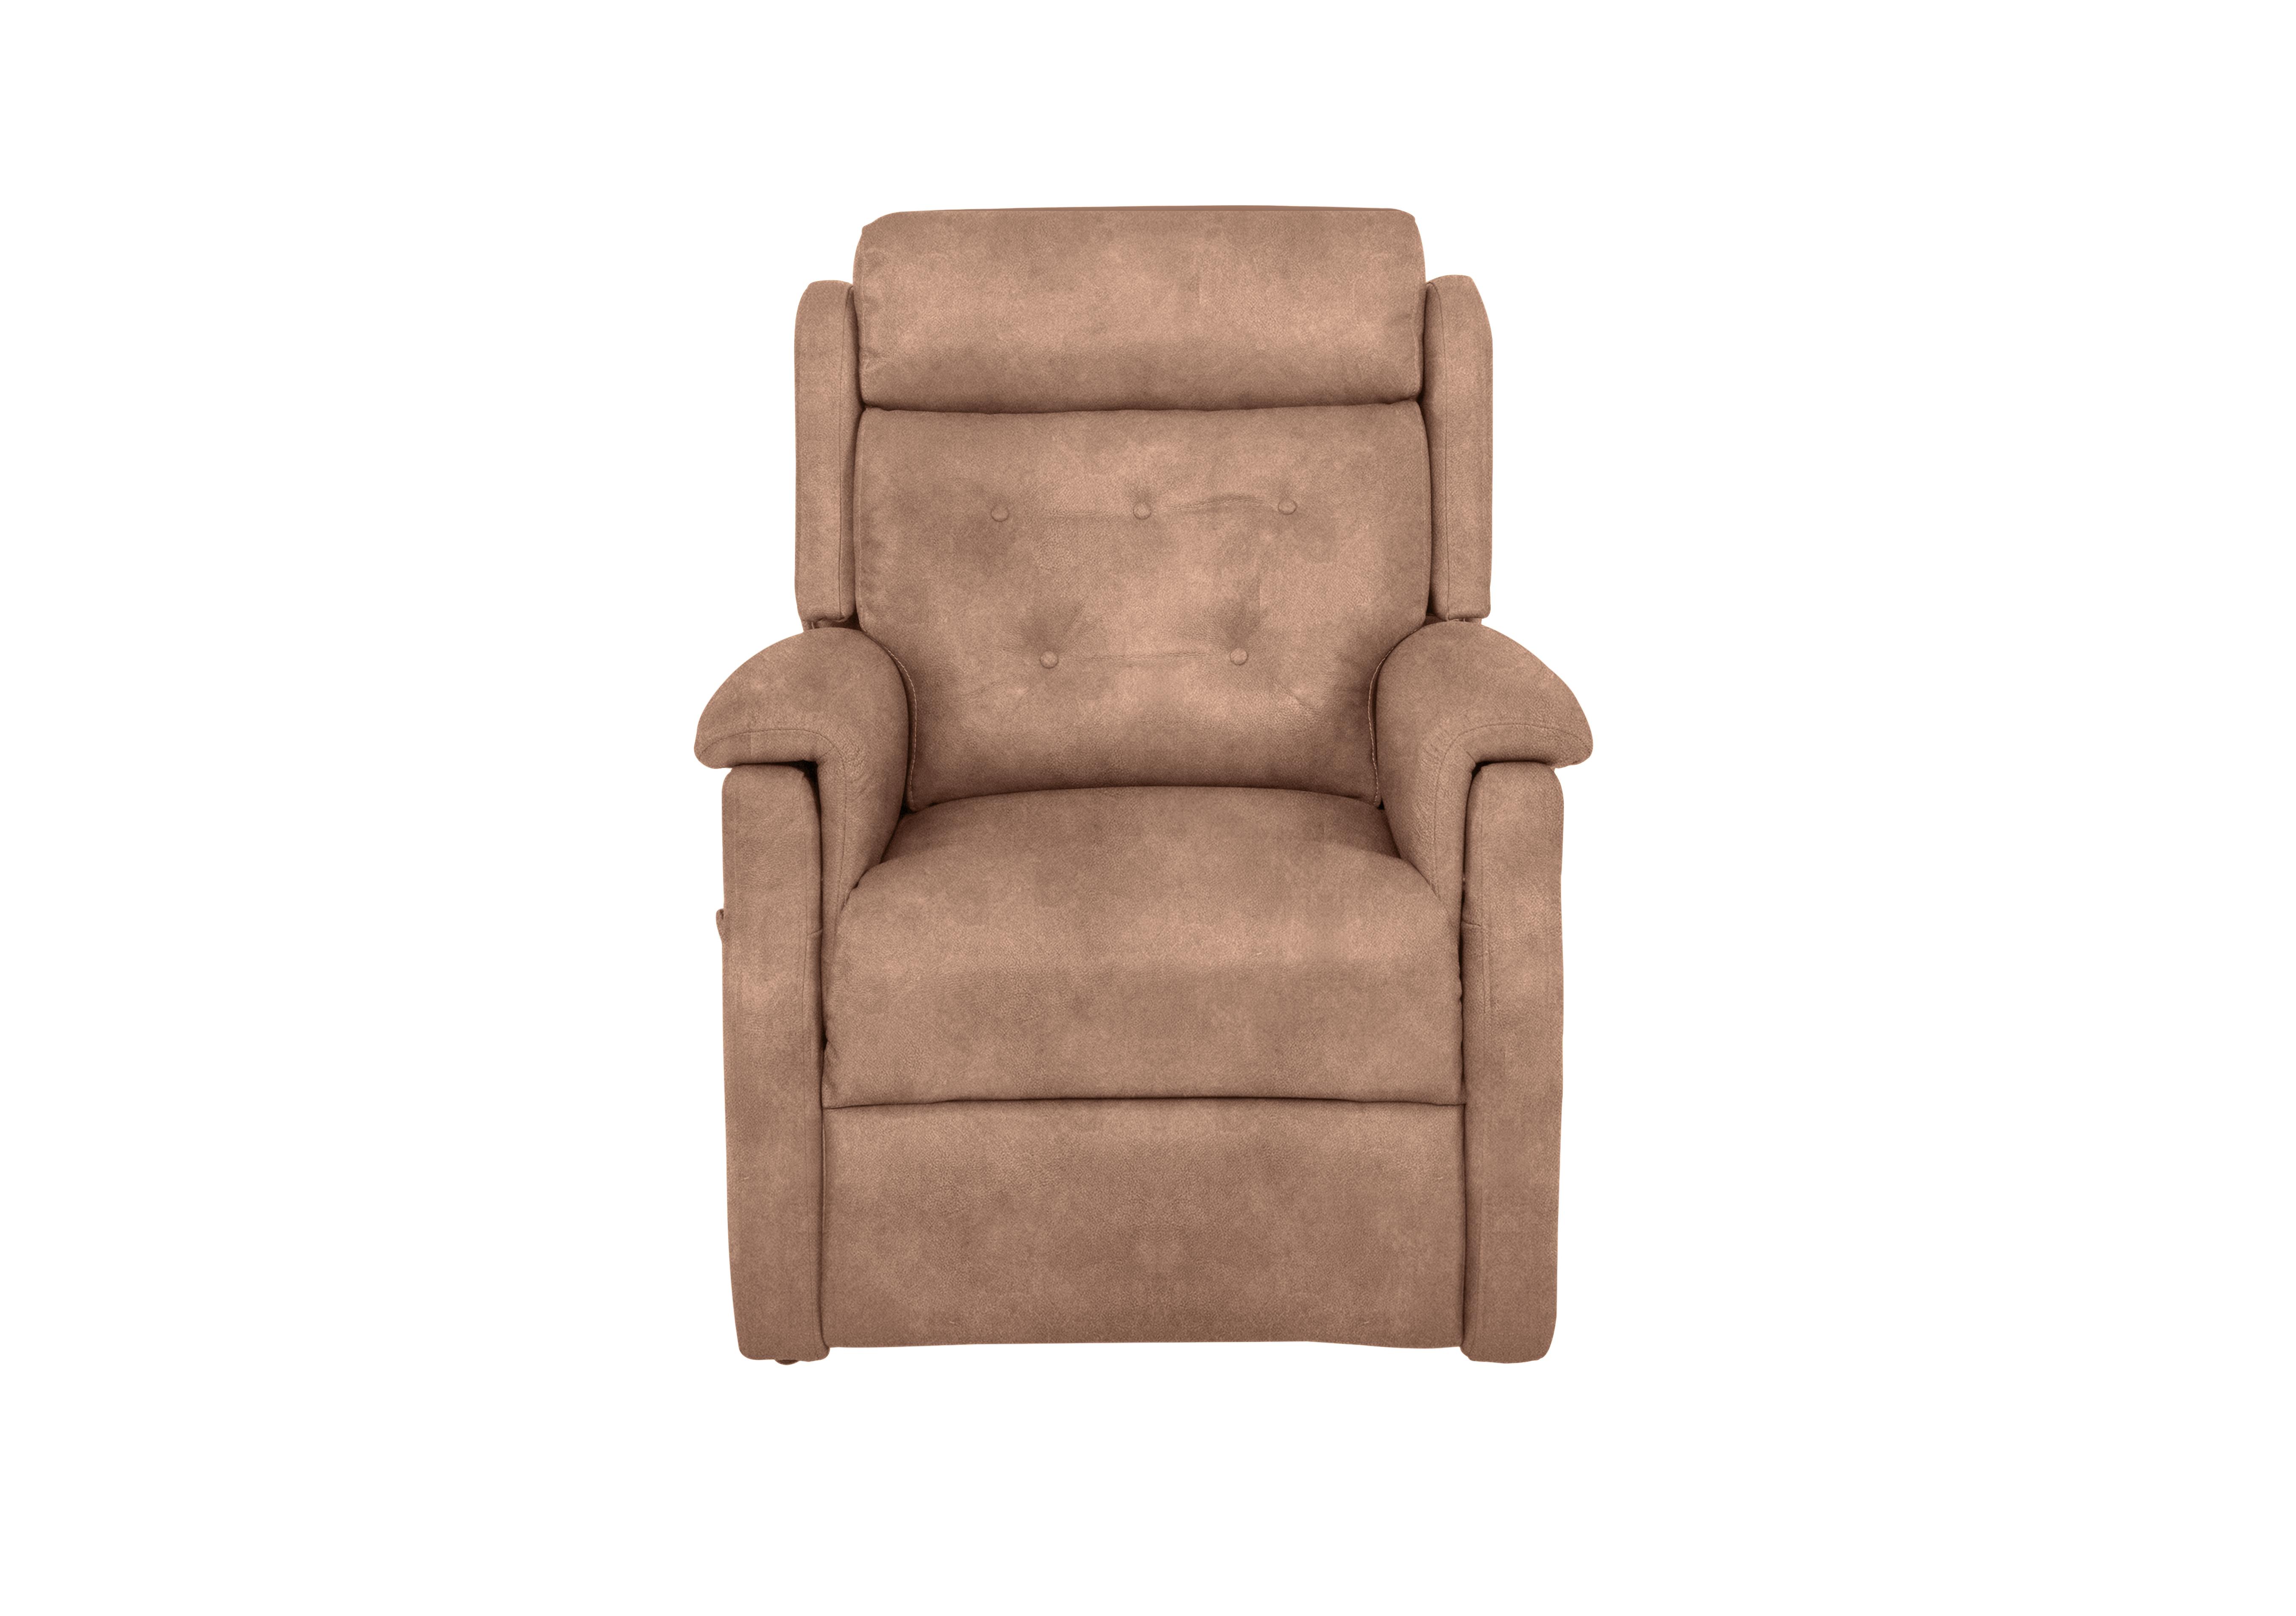 My Chair Scott Fabric Lift and Rise Chair in 43507 Sand Dexter 07 on Furniture Village